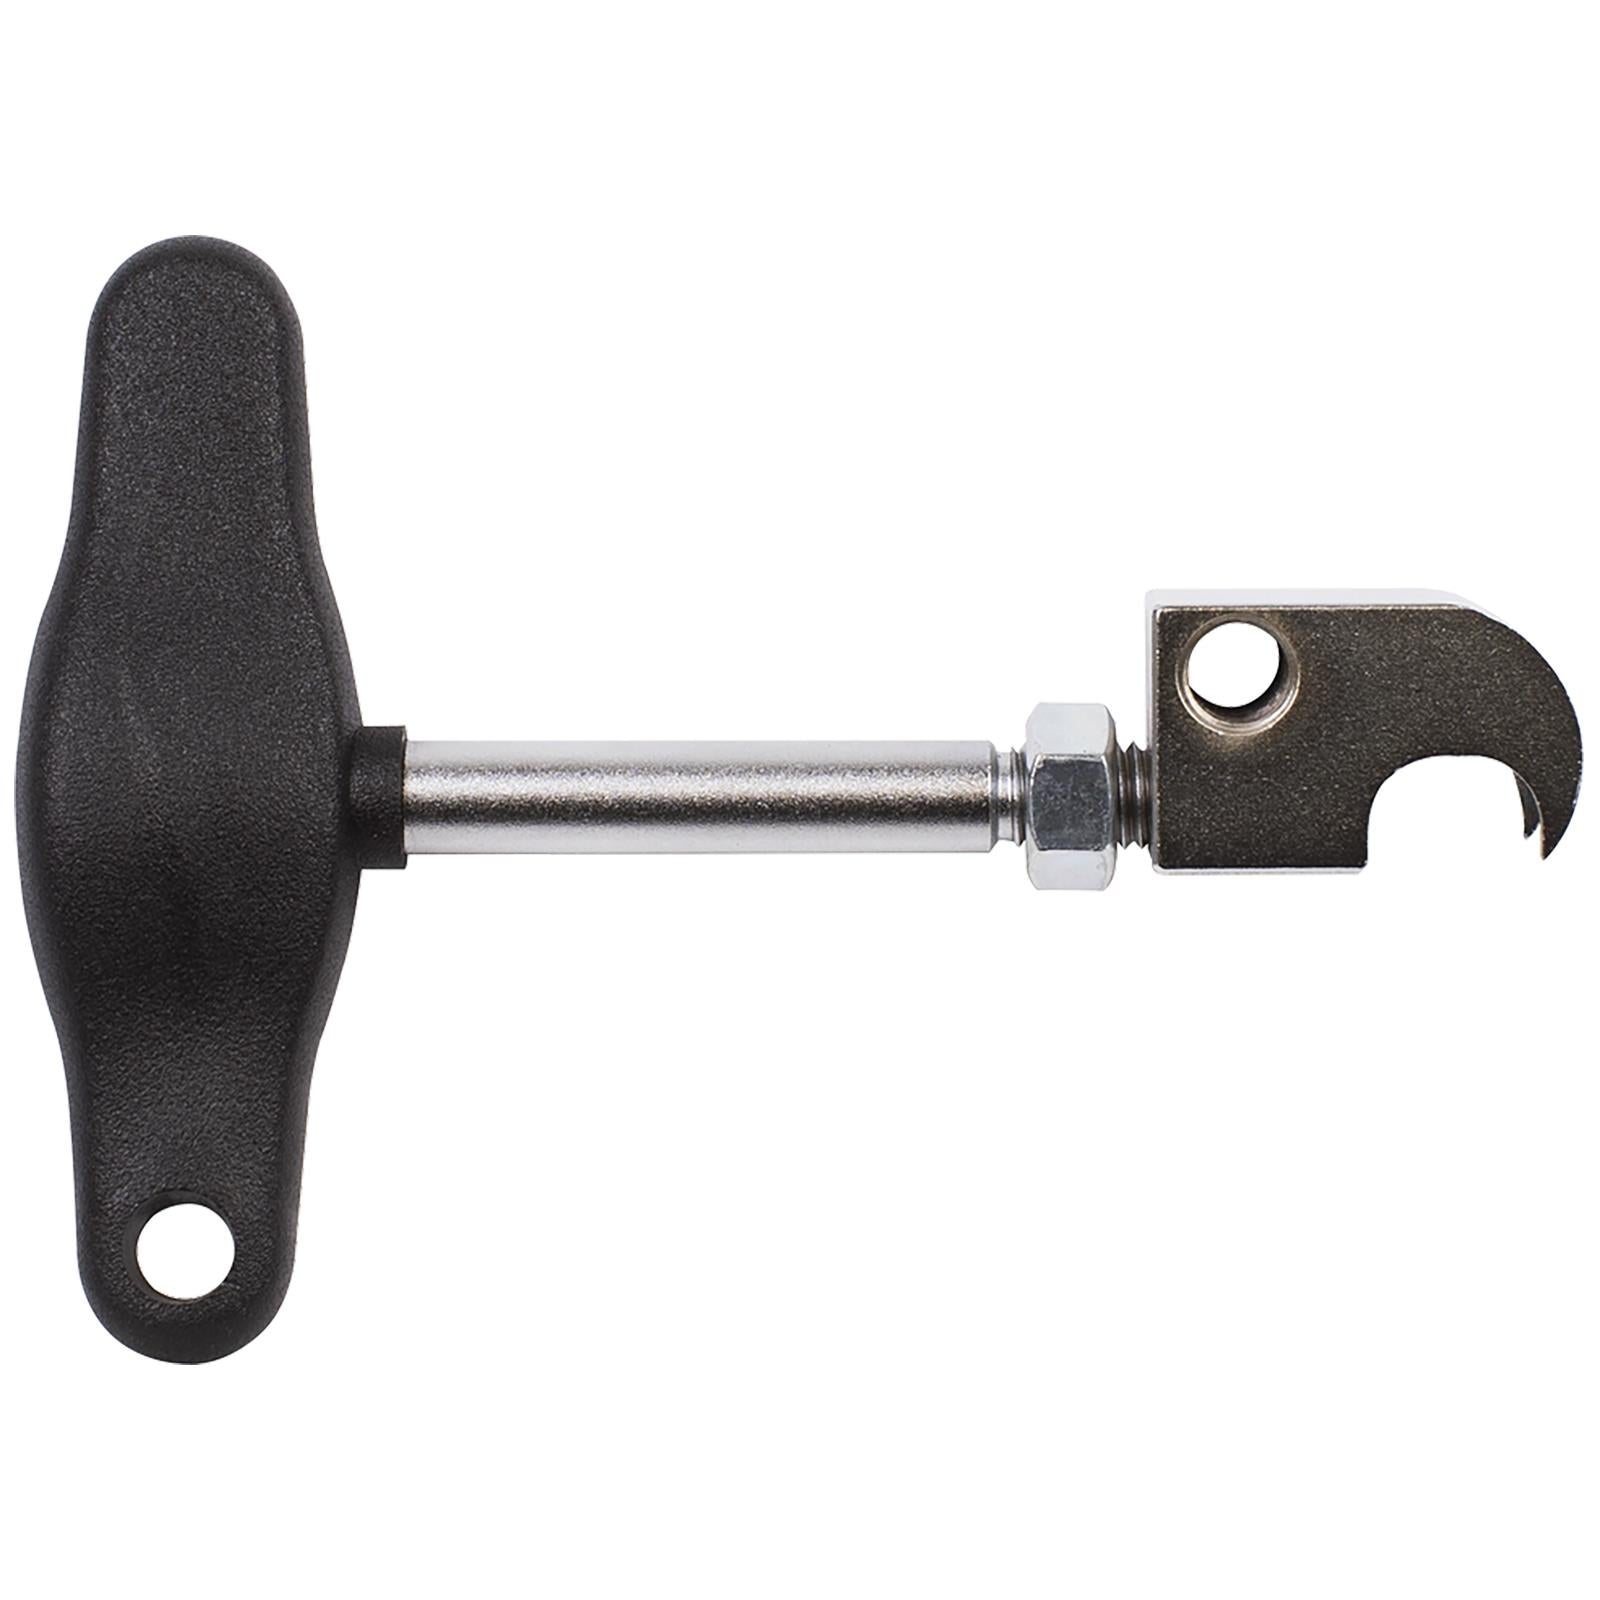 Sealey Hose Clamp Removal Tool for HENN Clamps